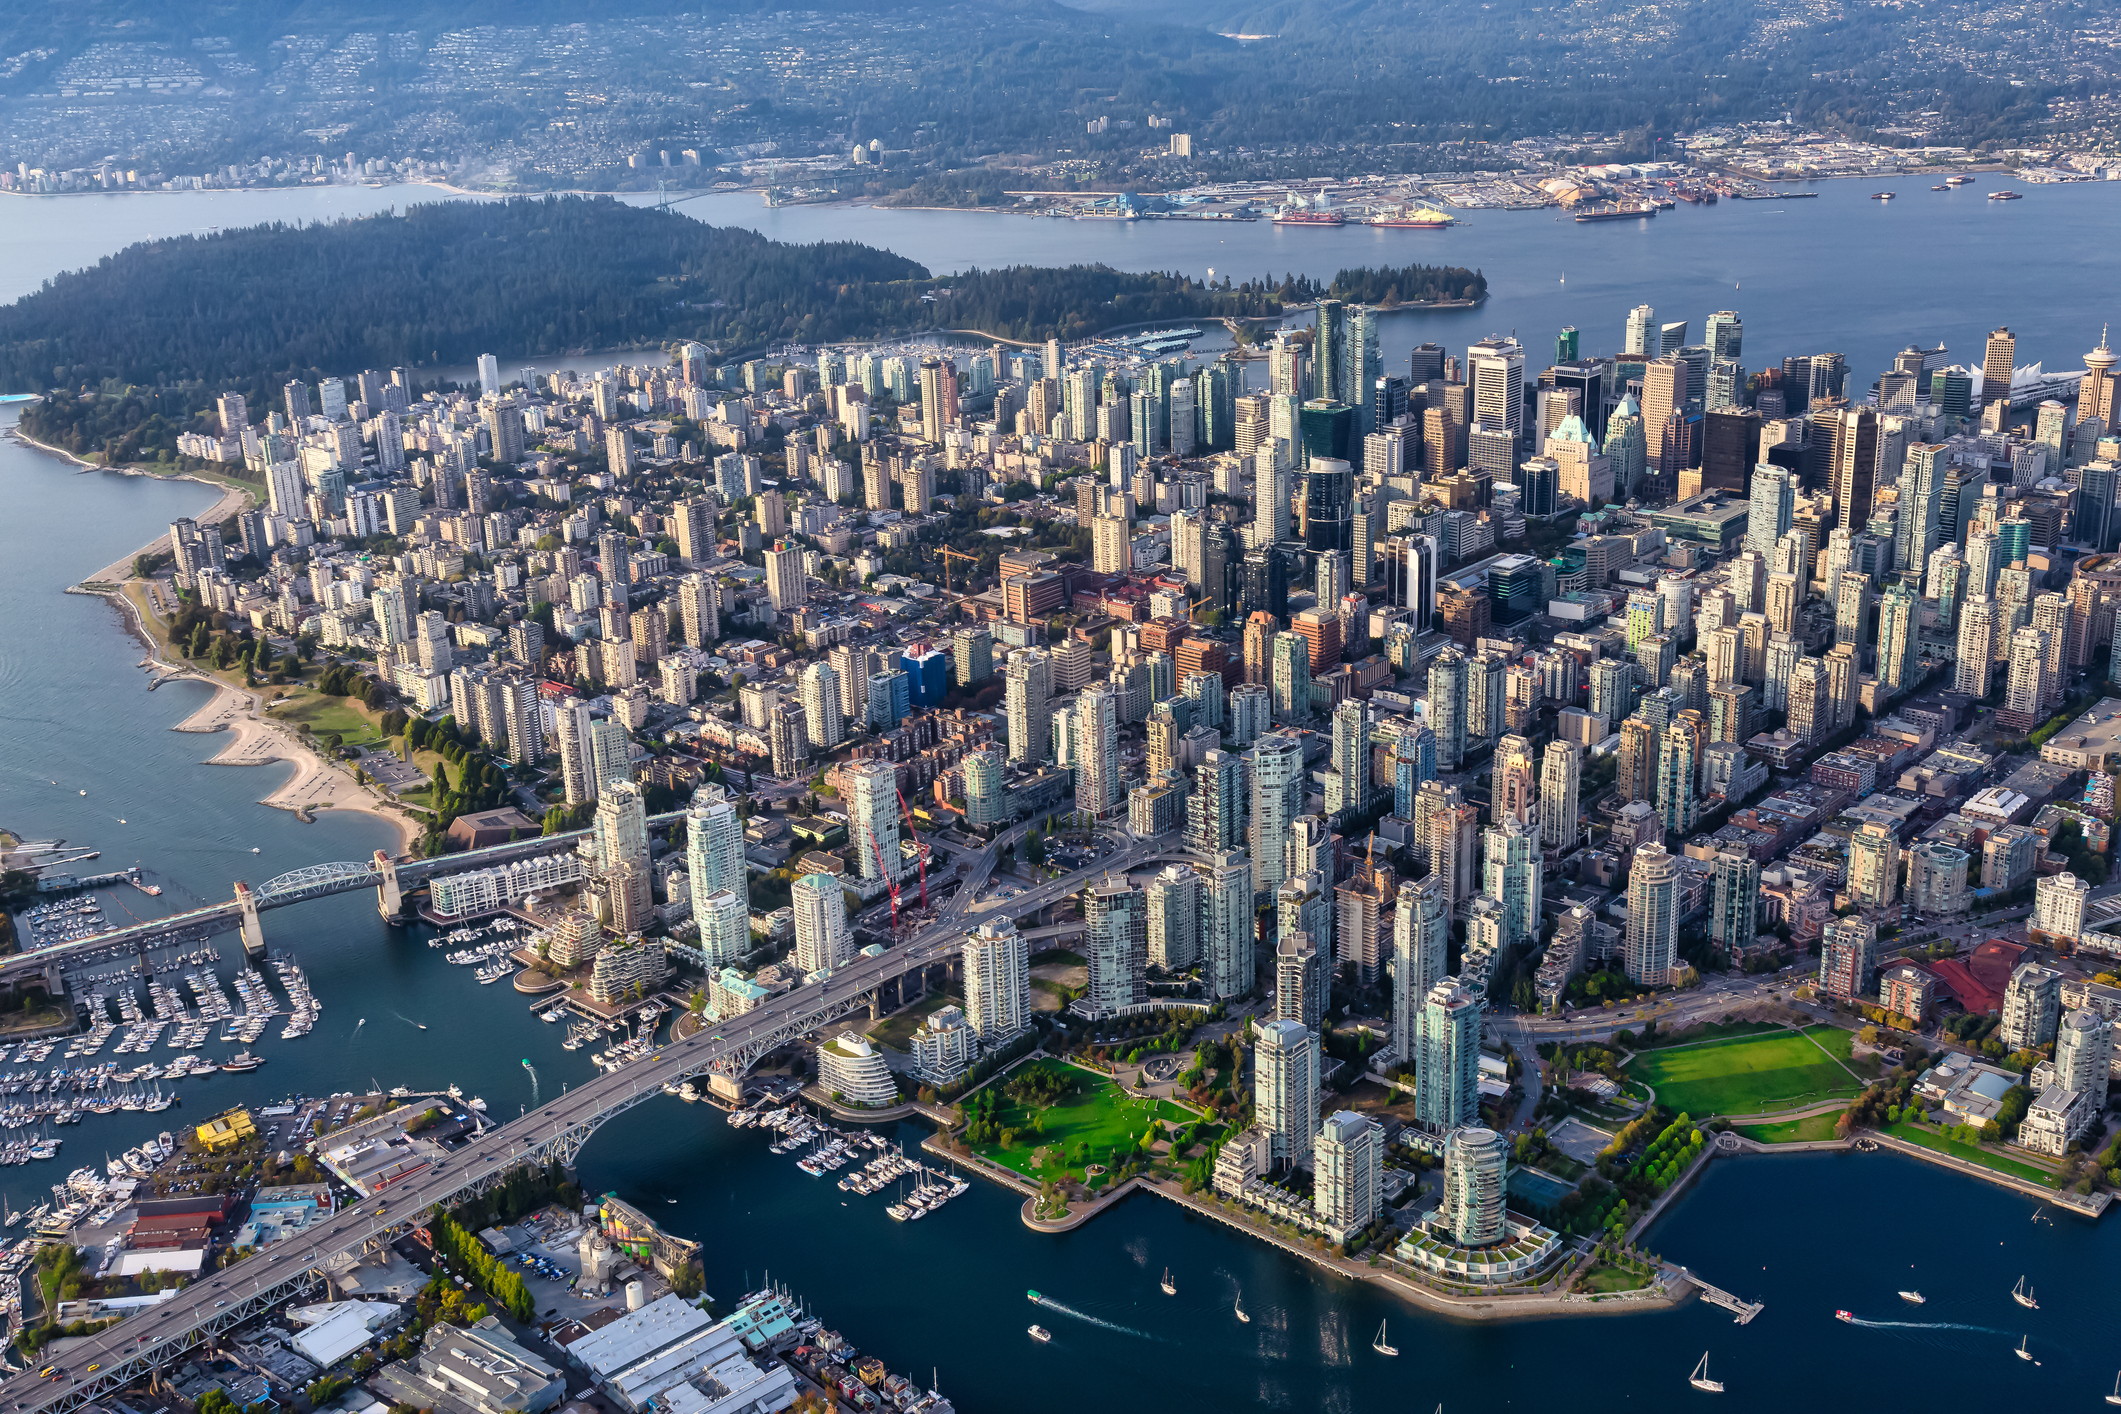 VANCOUVER COUNCIL EYES LOOSENING RENT LIMITS TO BOOST CONSTRUCTION